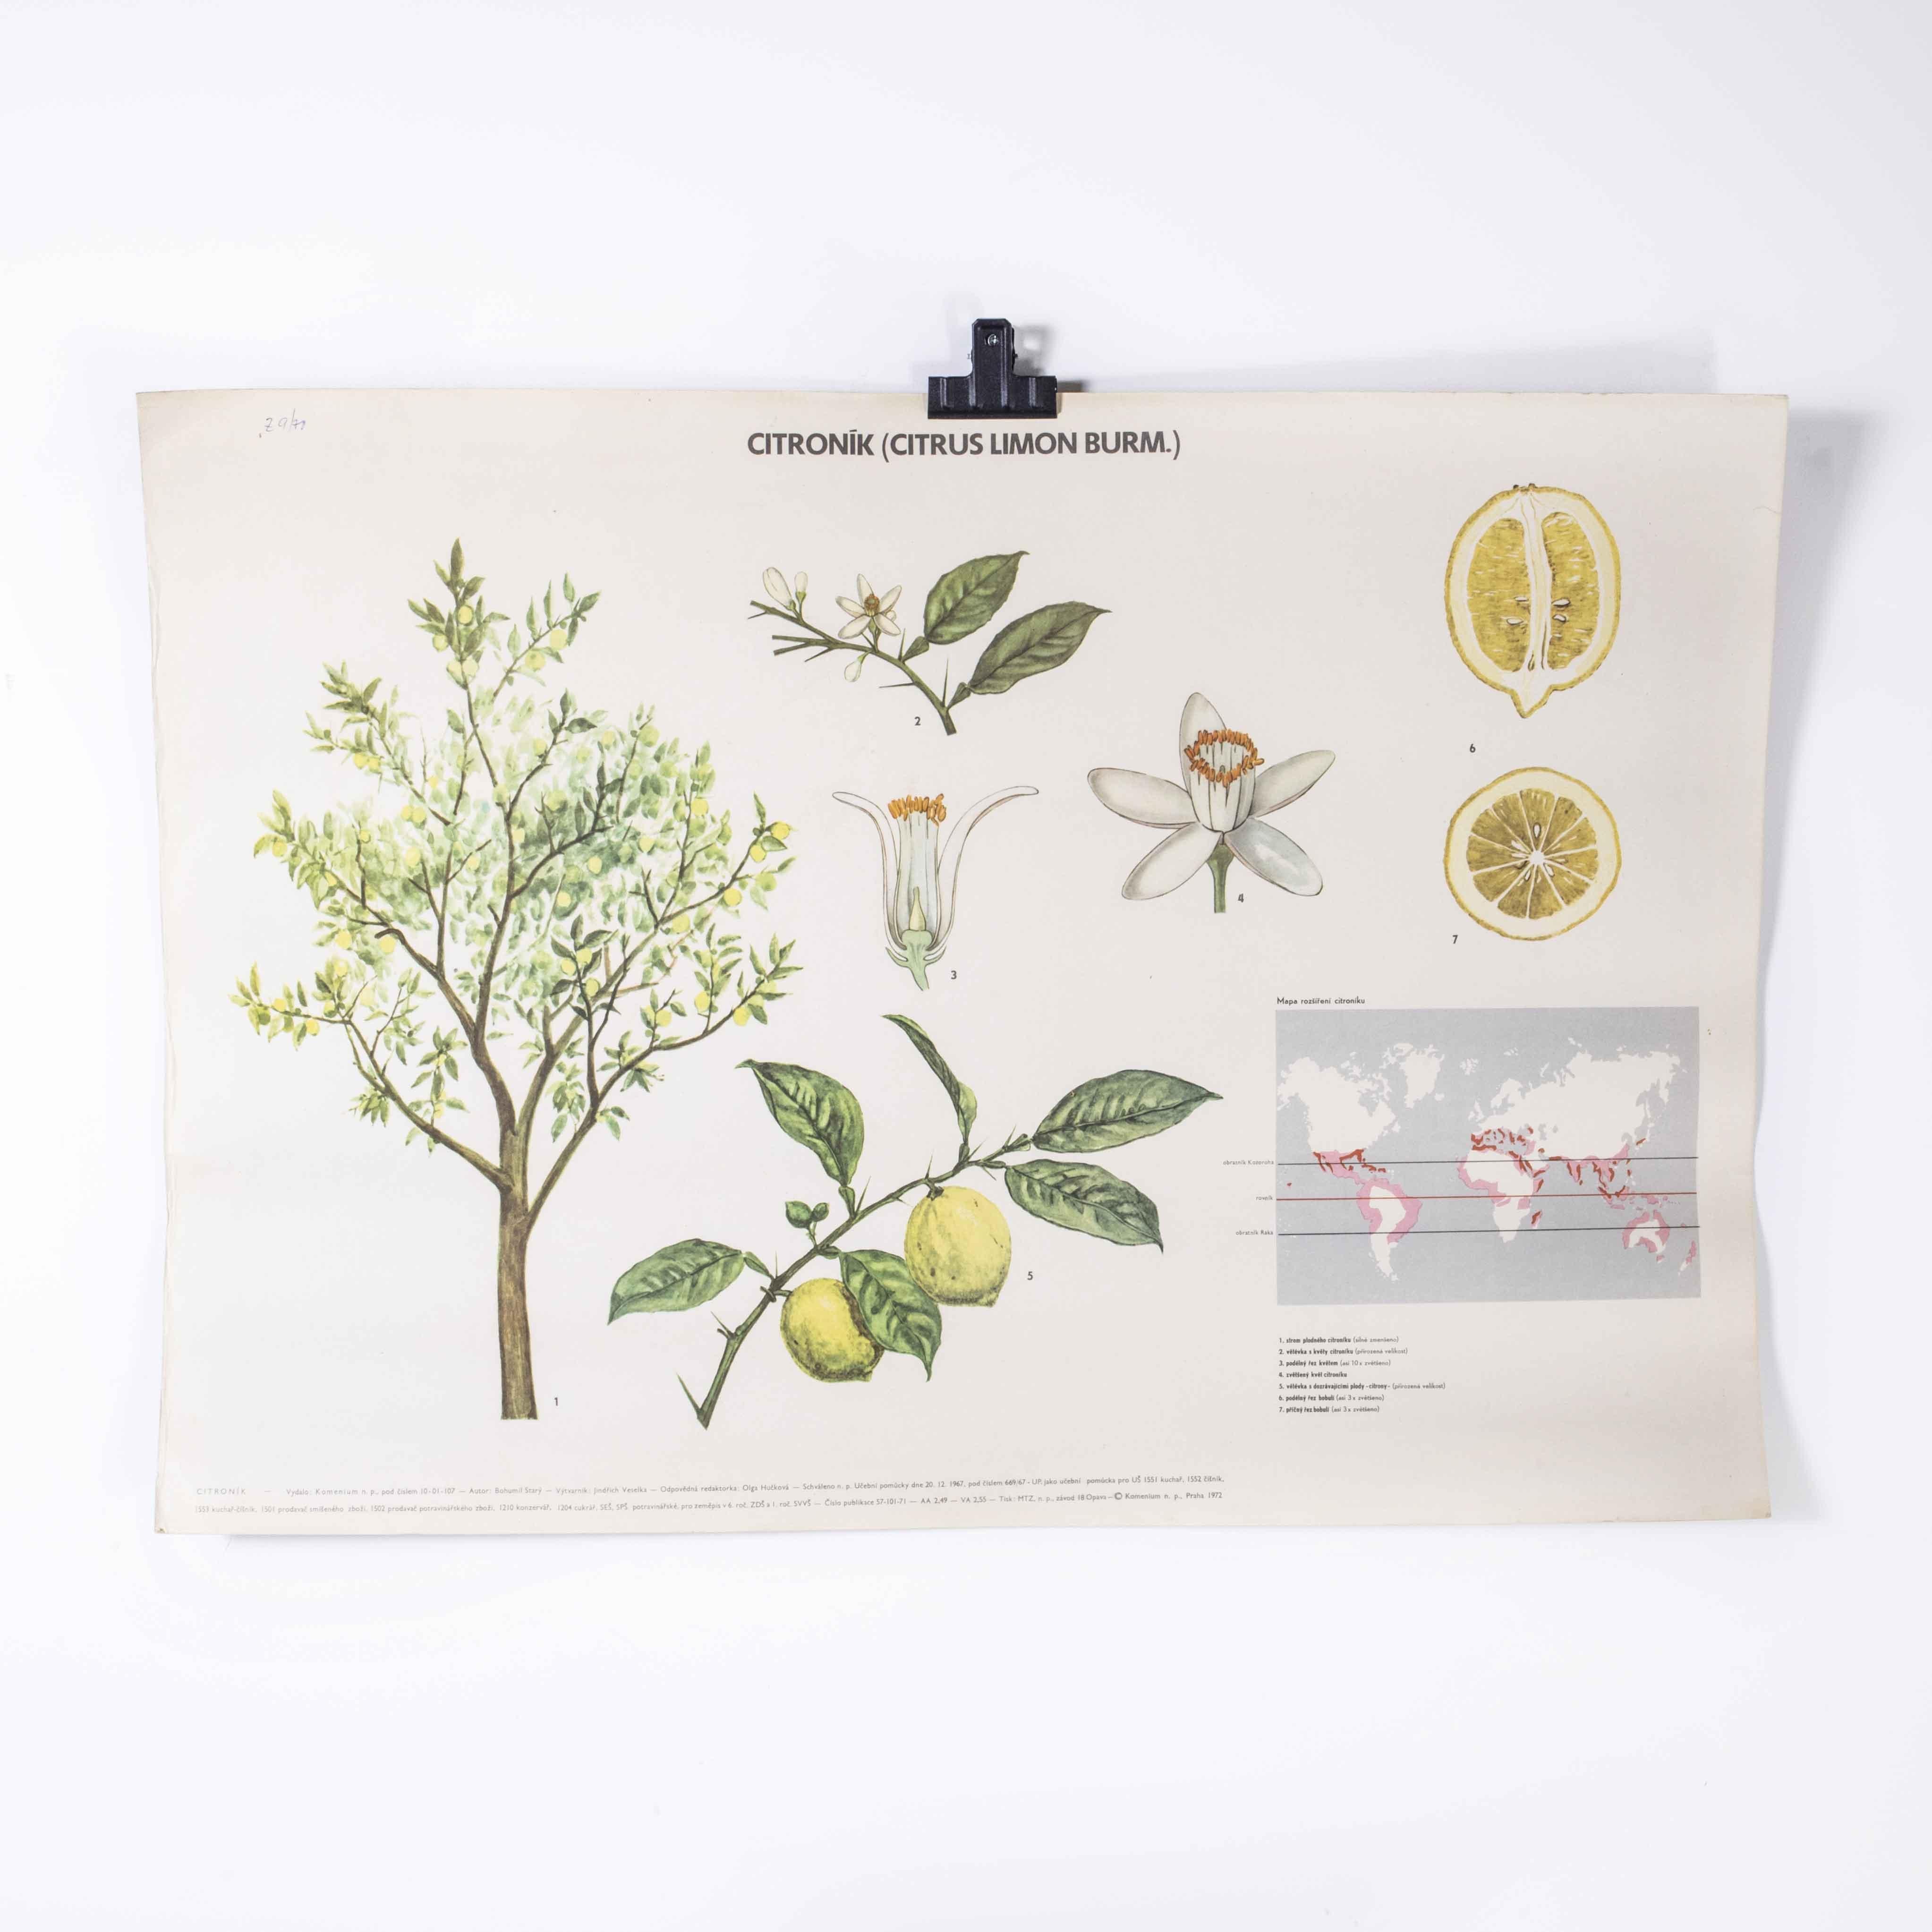 1970’s Lemon tree educational poster
1970’s Lemon tree educational poster. 20th century Czechoslovakian educational chart. A rare and vintage wall chart from the Czech Republic illustrating the internal structure of a lemon and its tree. This